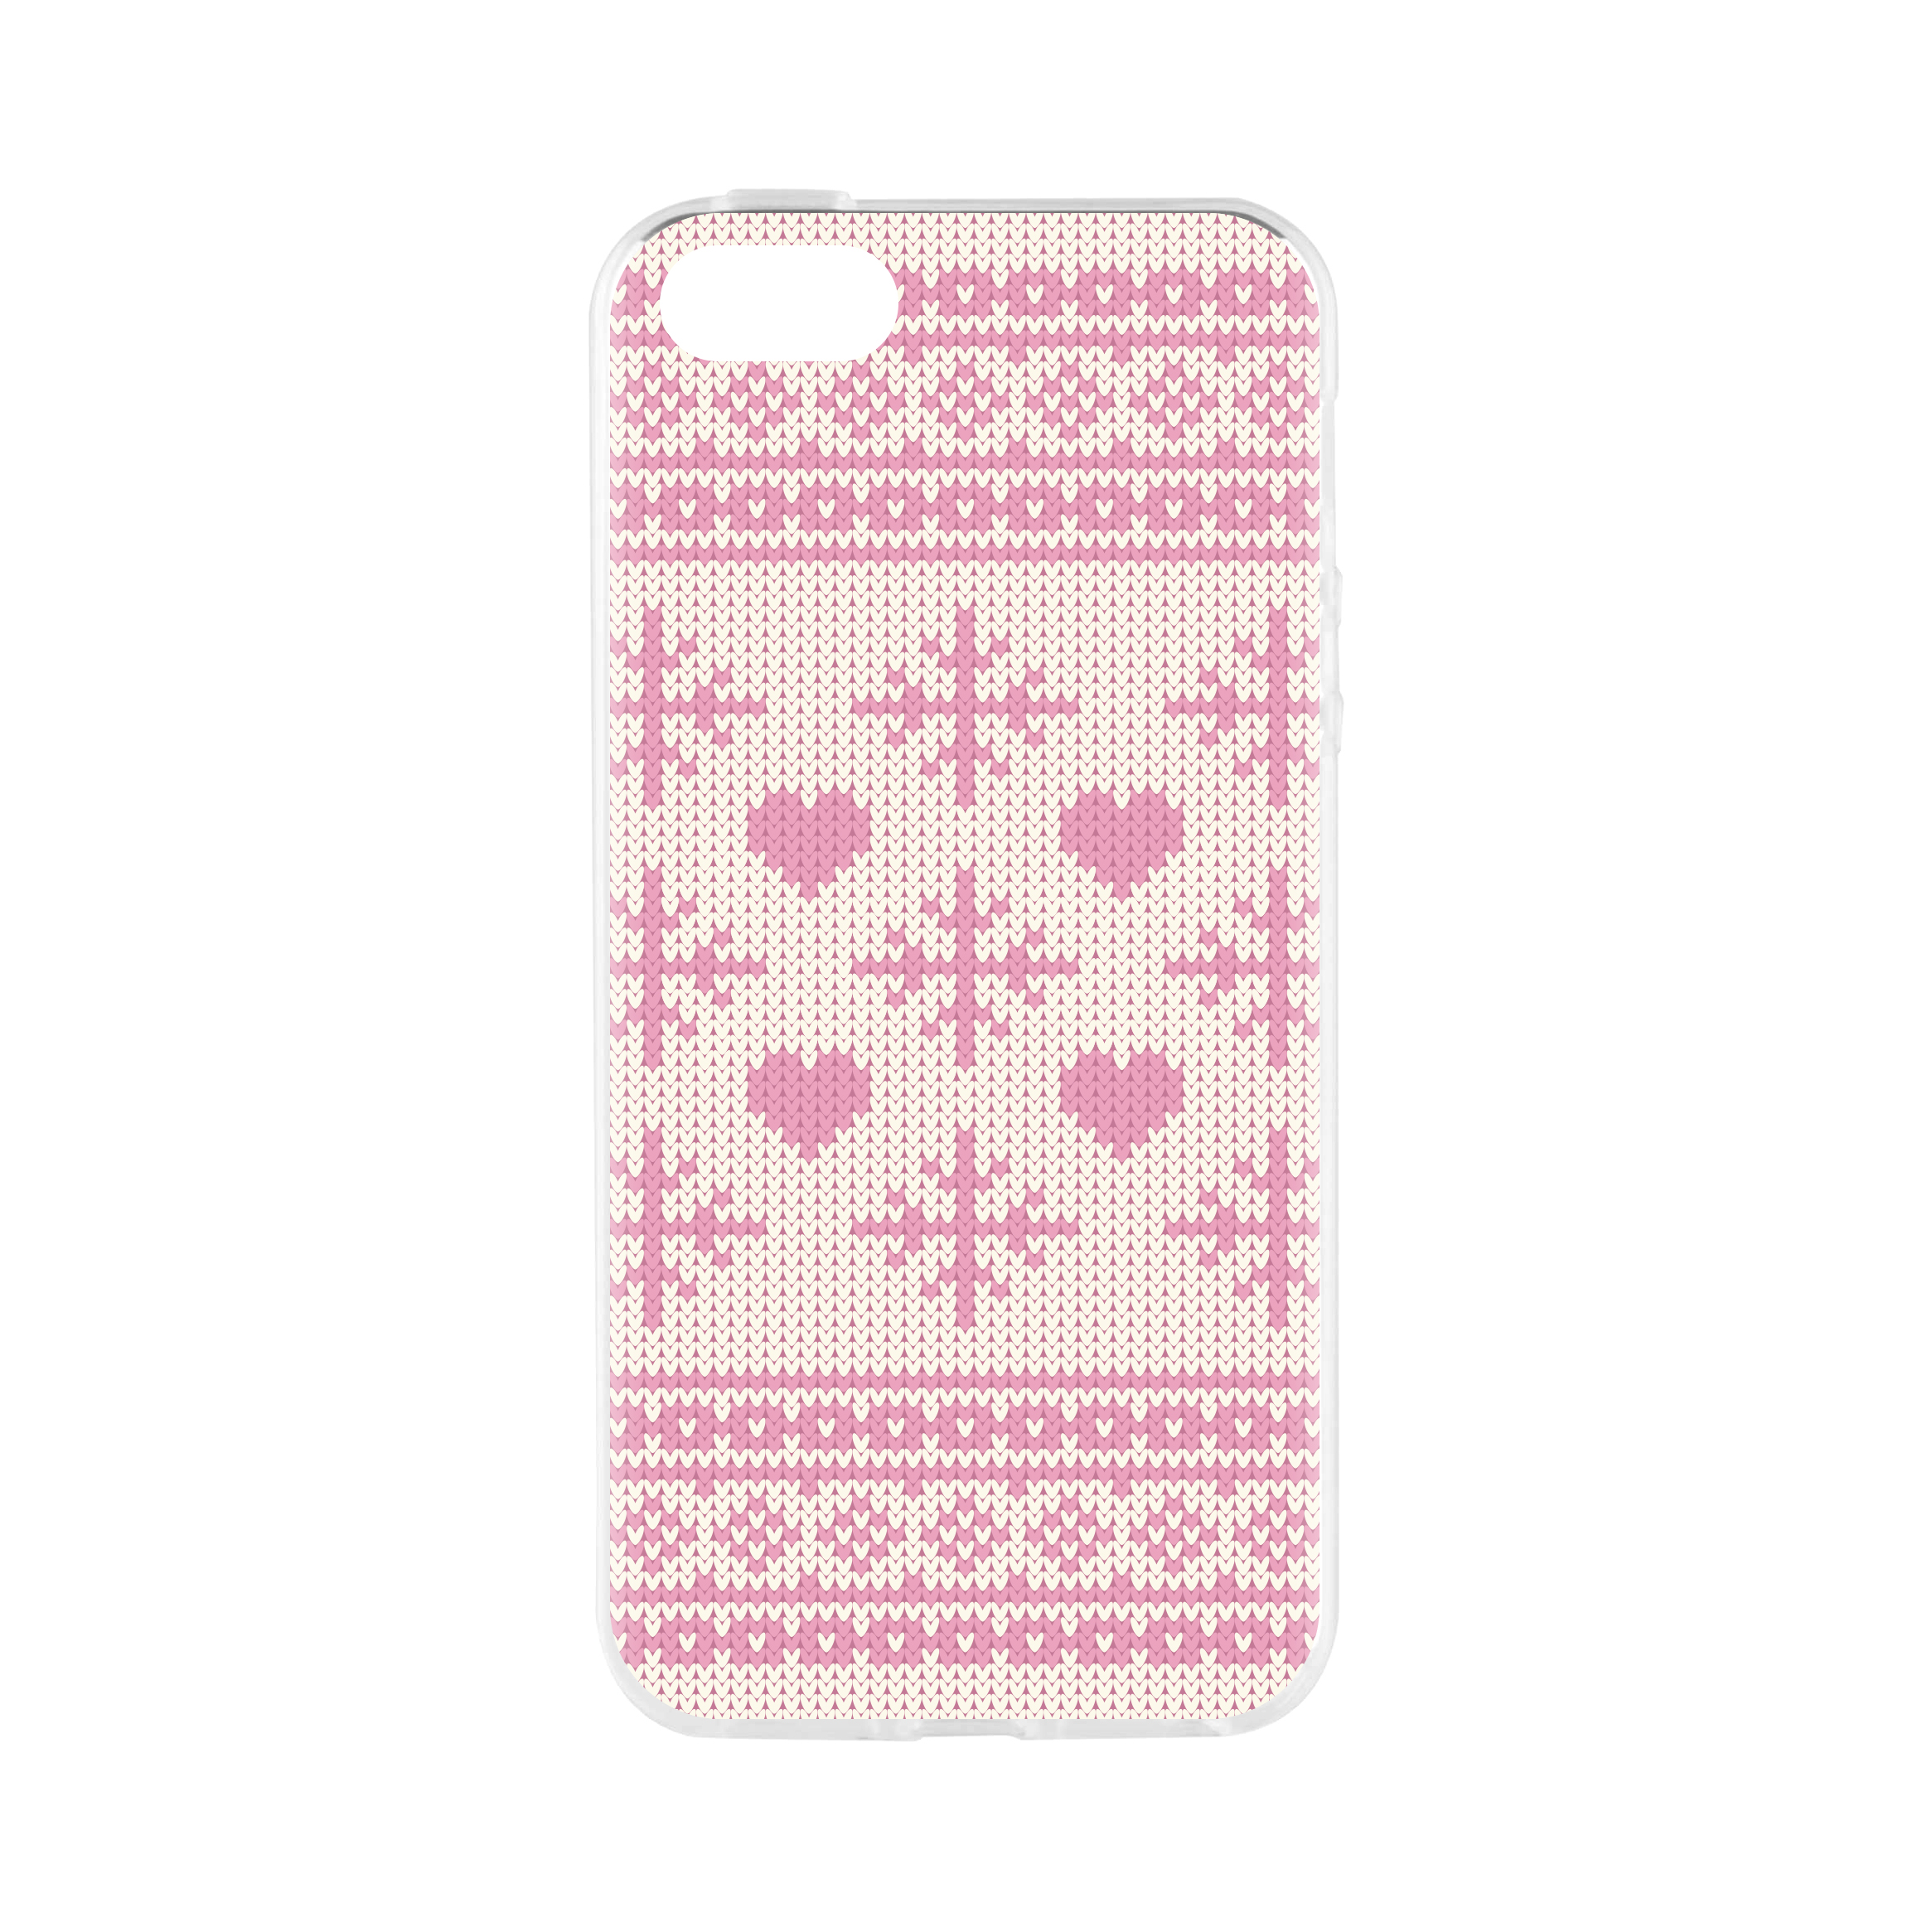 APPLE, Cardcase IPHONE 5/5S/SE, Ugly FLAVR Backcover, Sweater, Xmas PINK